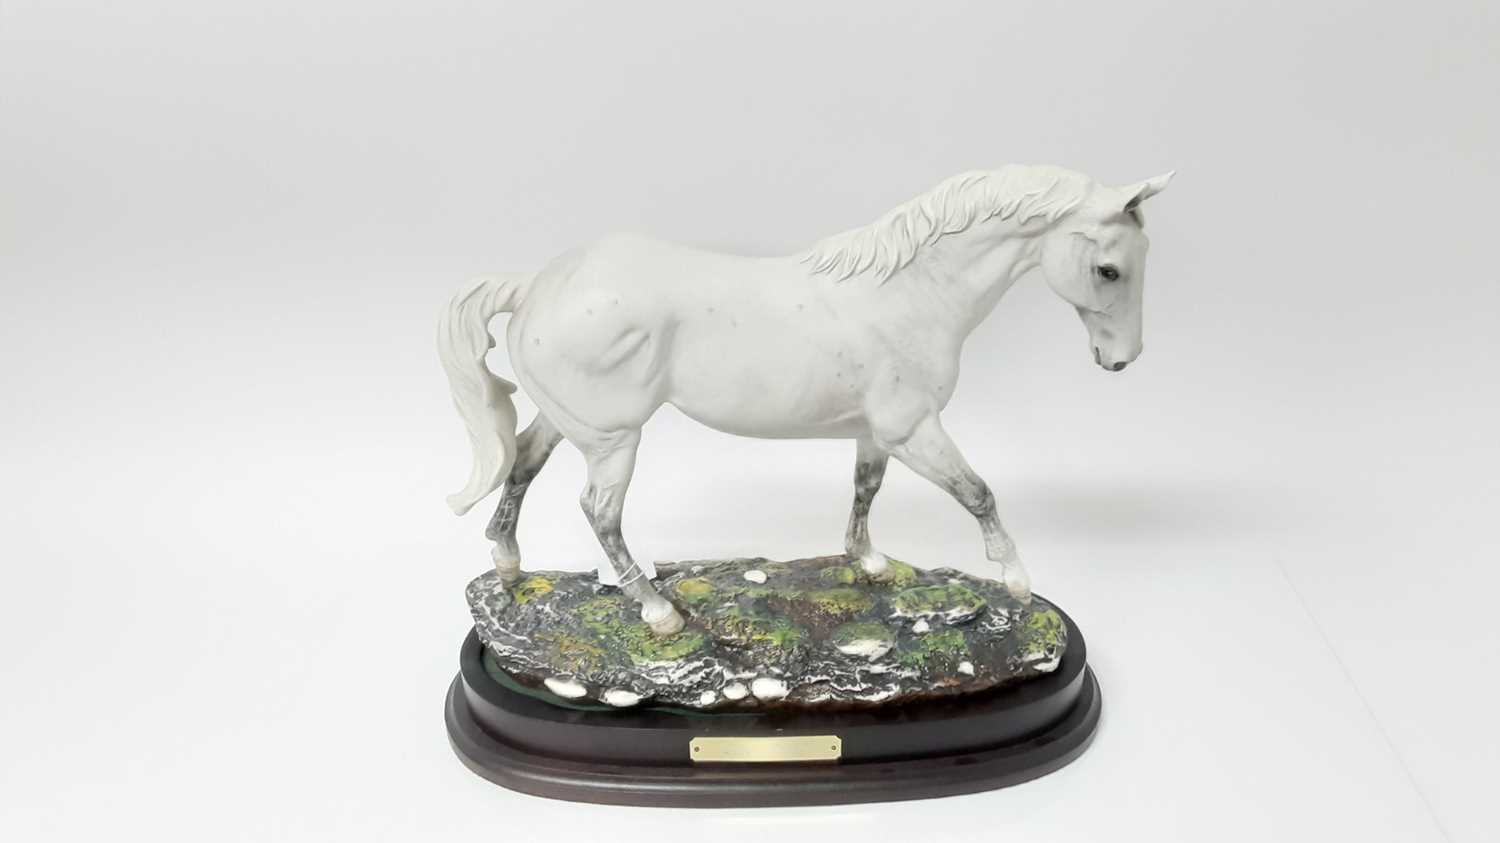 Lot 88 - Royal Doulton limited edition model Horse - Desert Orchid DA 134, modelled by Graham Tongue, no 3136 of 7500